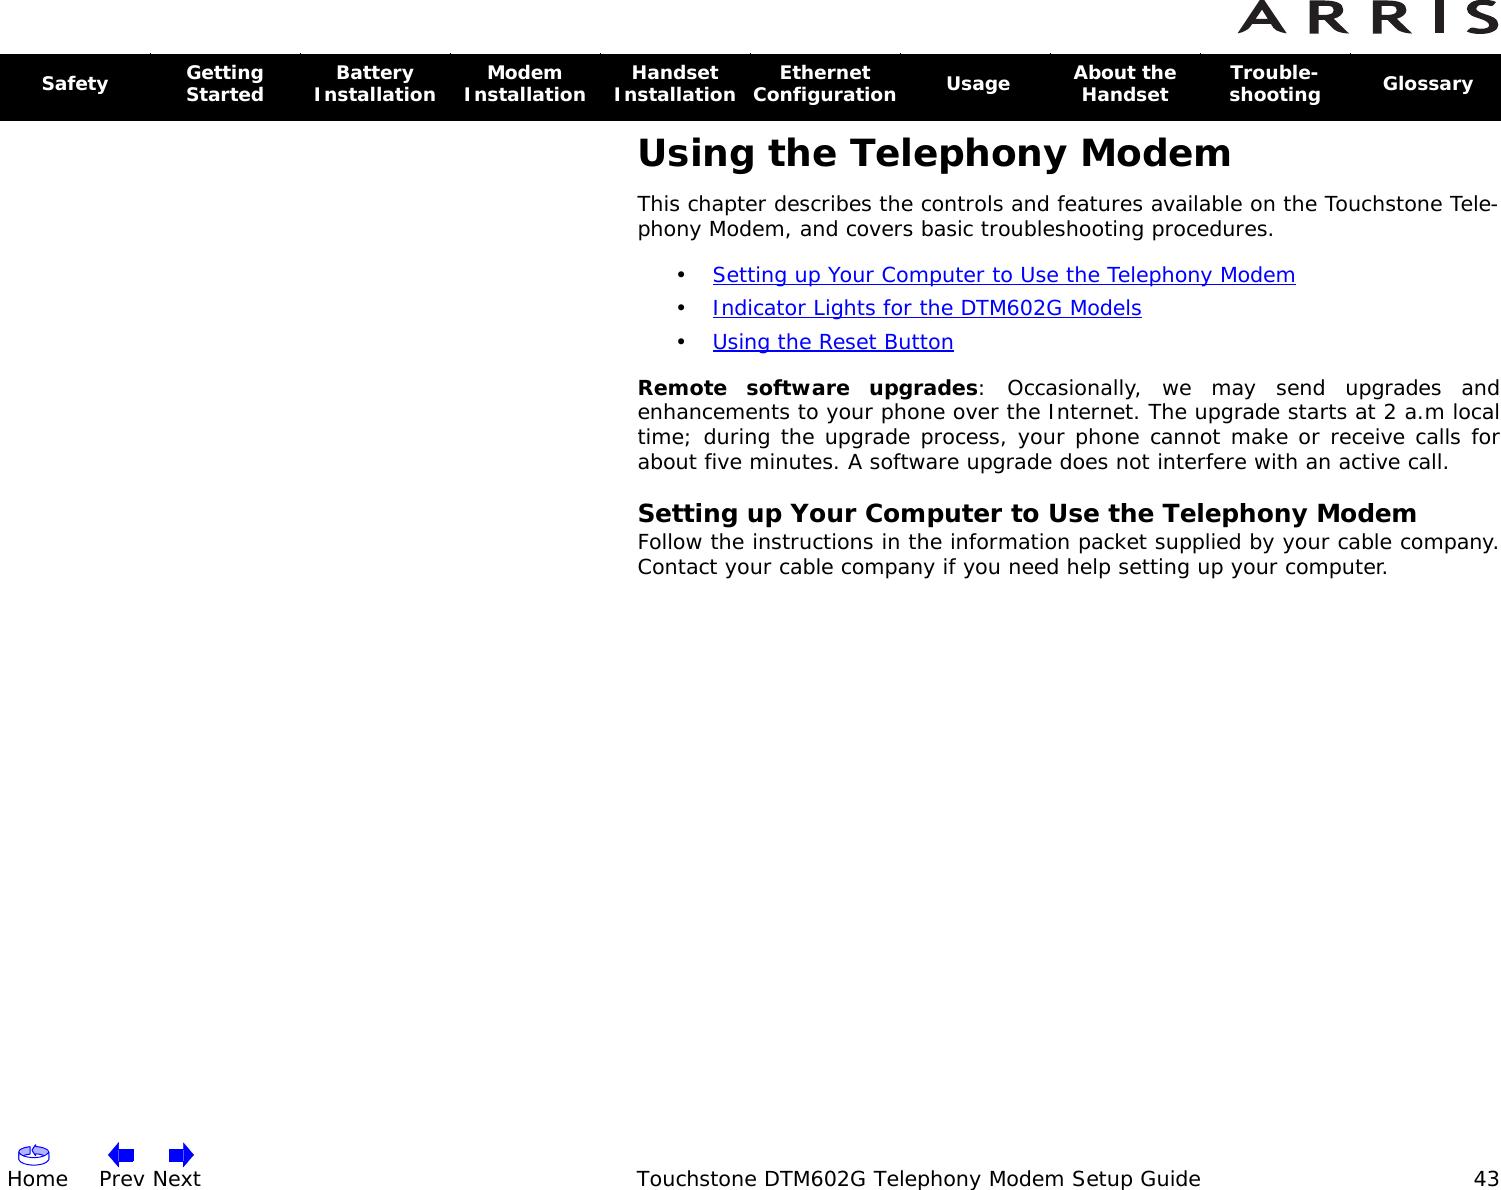 Home Prev Next Touchstone DTM602G Telephony Modem Setup Guide 43Safety Getting Started Battery Installation Modem Installation Handset Installation Ethernet Configuration  Usage About the Handset Trouble-shooting  GlossaryUsing the Telephony ModemThis chapter describes the controls and features available on the Touchstone Tele-phony Modem, and covers basic troubleshooting procedures.•Setting up Your Computer to Use the Telephony Modem •Indicator Lights for the DTM602G Models •Using the Reset Button Remote software upgrades: Occasionally, we may send upgrades and enhancements to your phone over the Internet. The upgrade starts at 2 a.m local time; during the upgrade process, your phone cannot make or receive calls for about five minutes. A software upgrade does not interfere with an active call.Setting up Your Computer to Use the Telephony ModemFollow the instructions in the information packet supplied by your cable company. Contact your cable company if you need help setting up your computer.